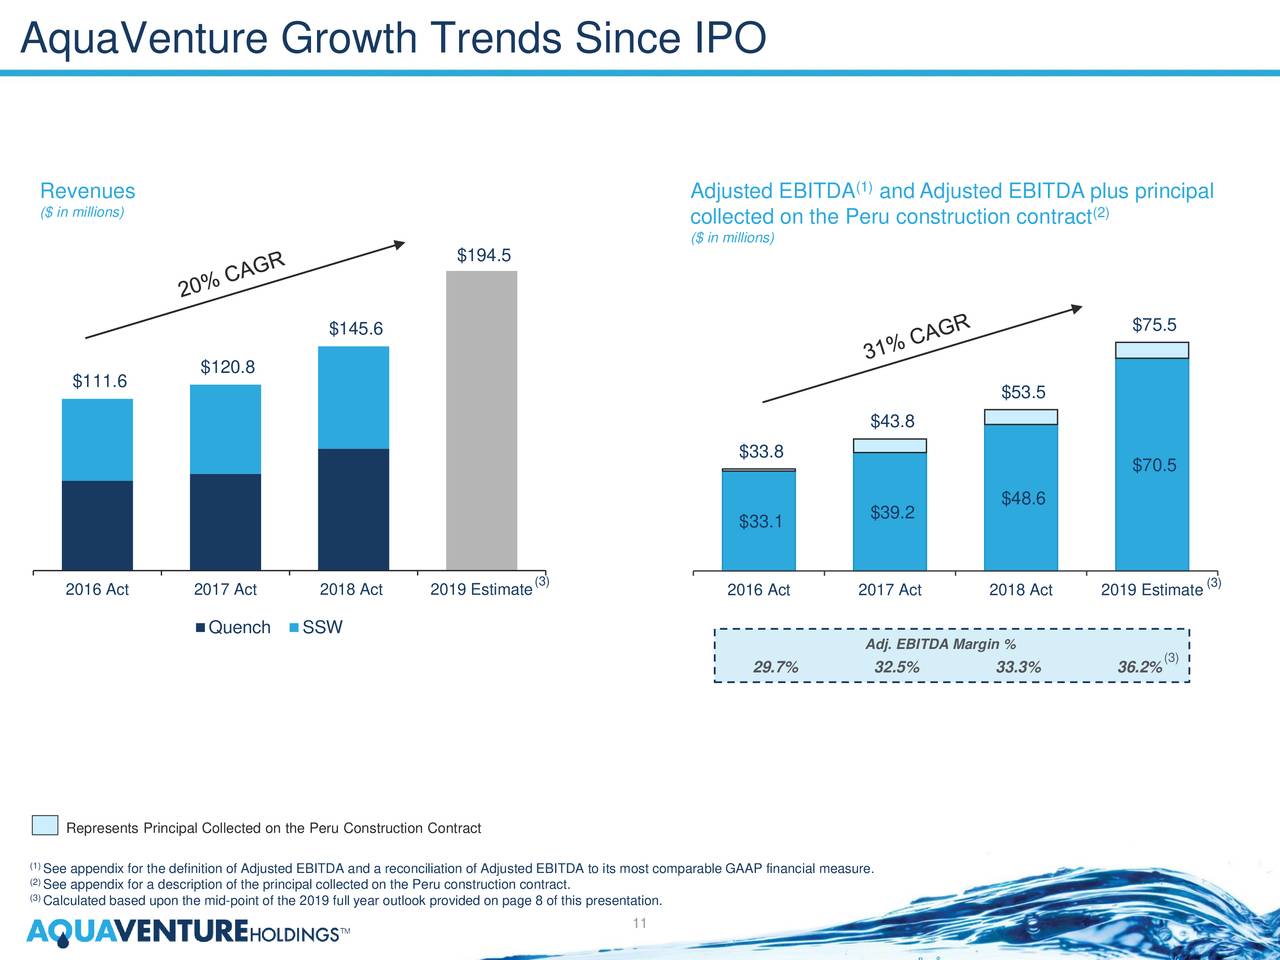 AquaVenture Growth Trends Since IPO